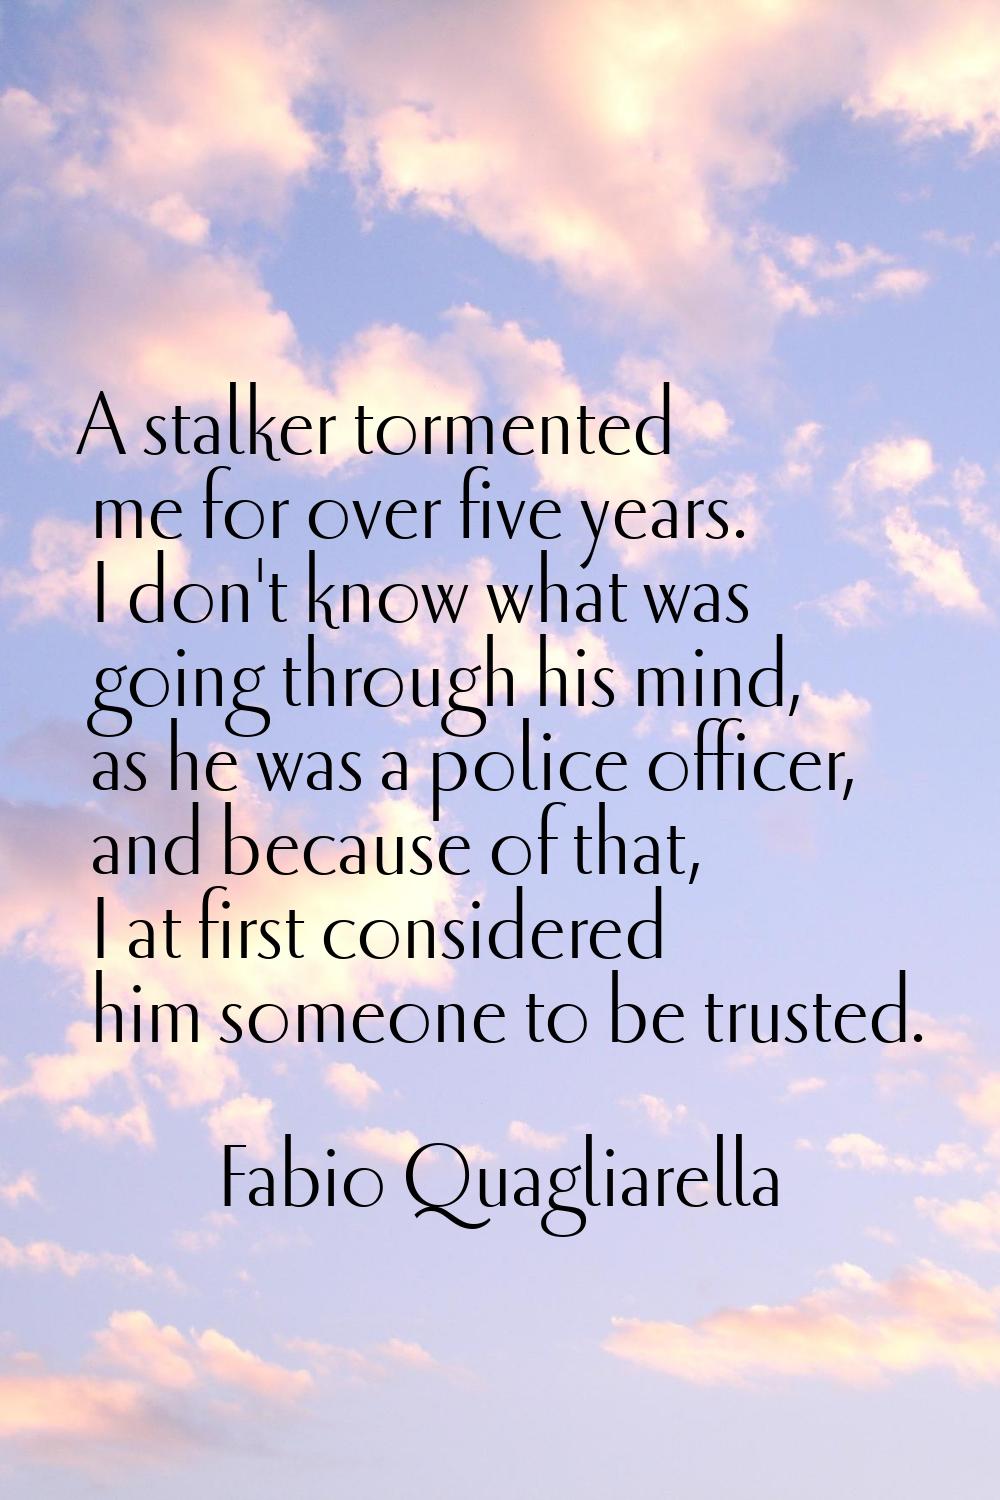 A stalker tormented me for over five years. I don't know what was going through his mind, as he was